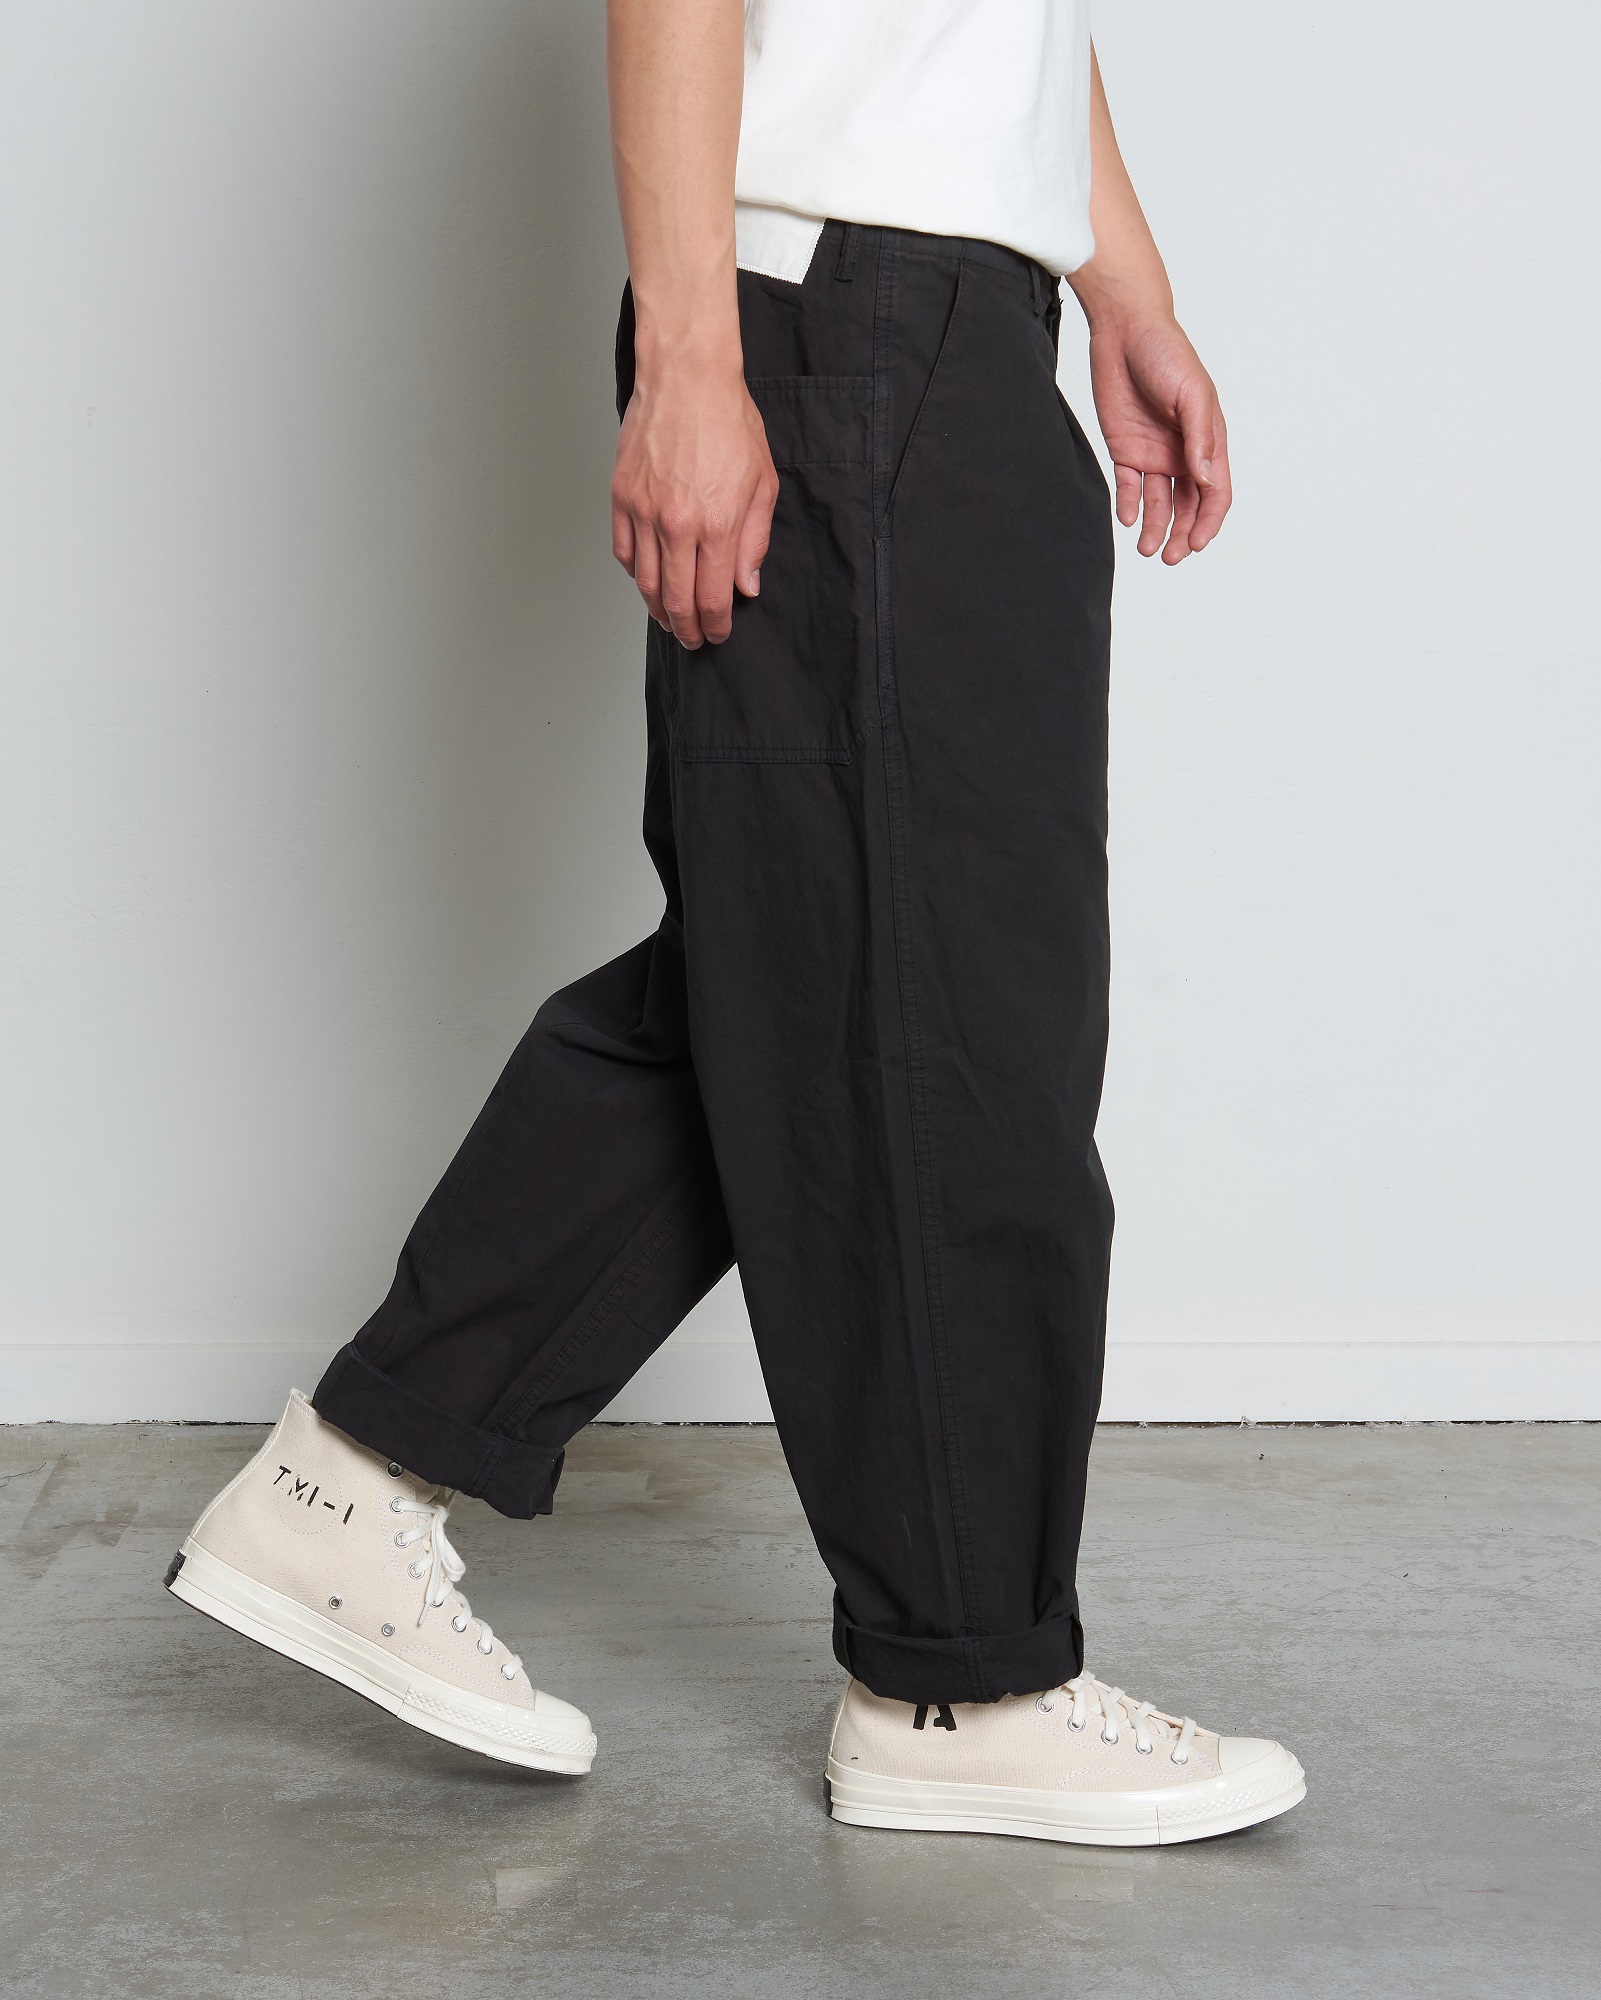 APPLIED ART FORMS Japanese Cargo Pant in Black